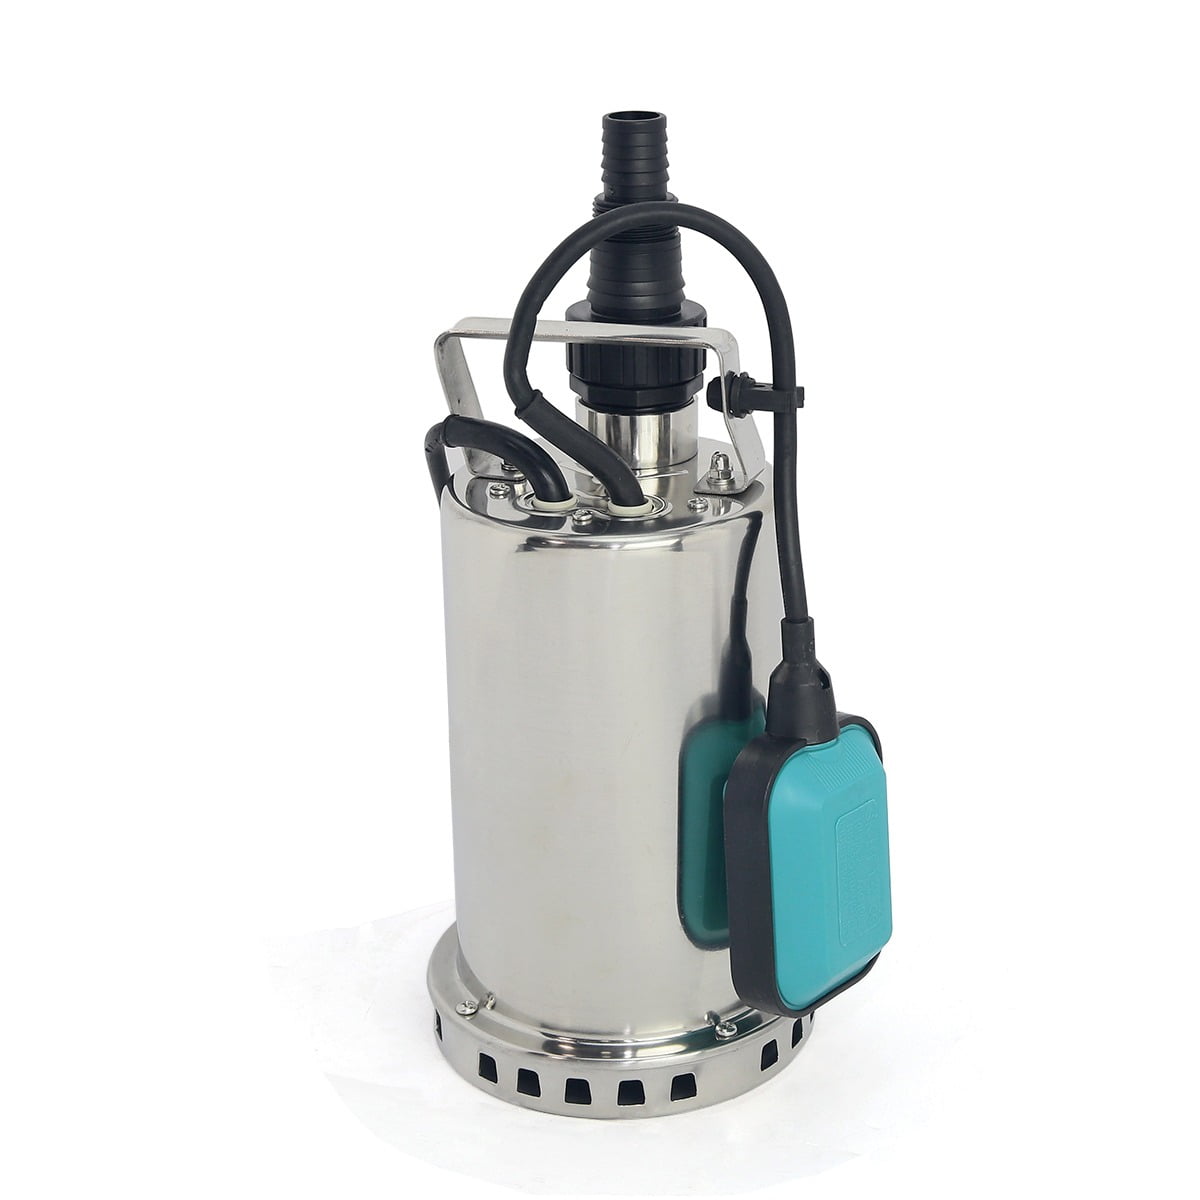 Details about   1HP Electric Submersible Water Pump Sump with Float Switch Portable B 34 